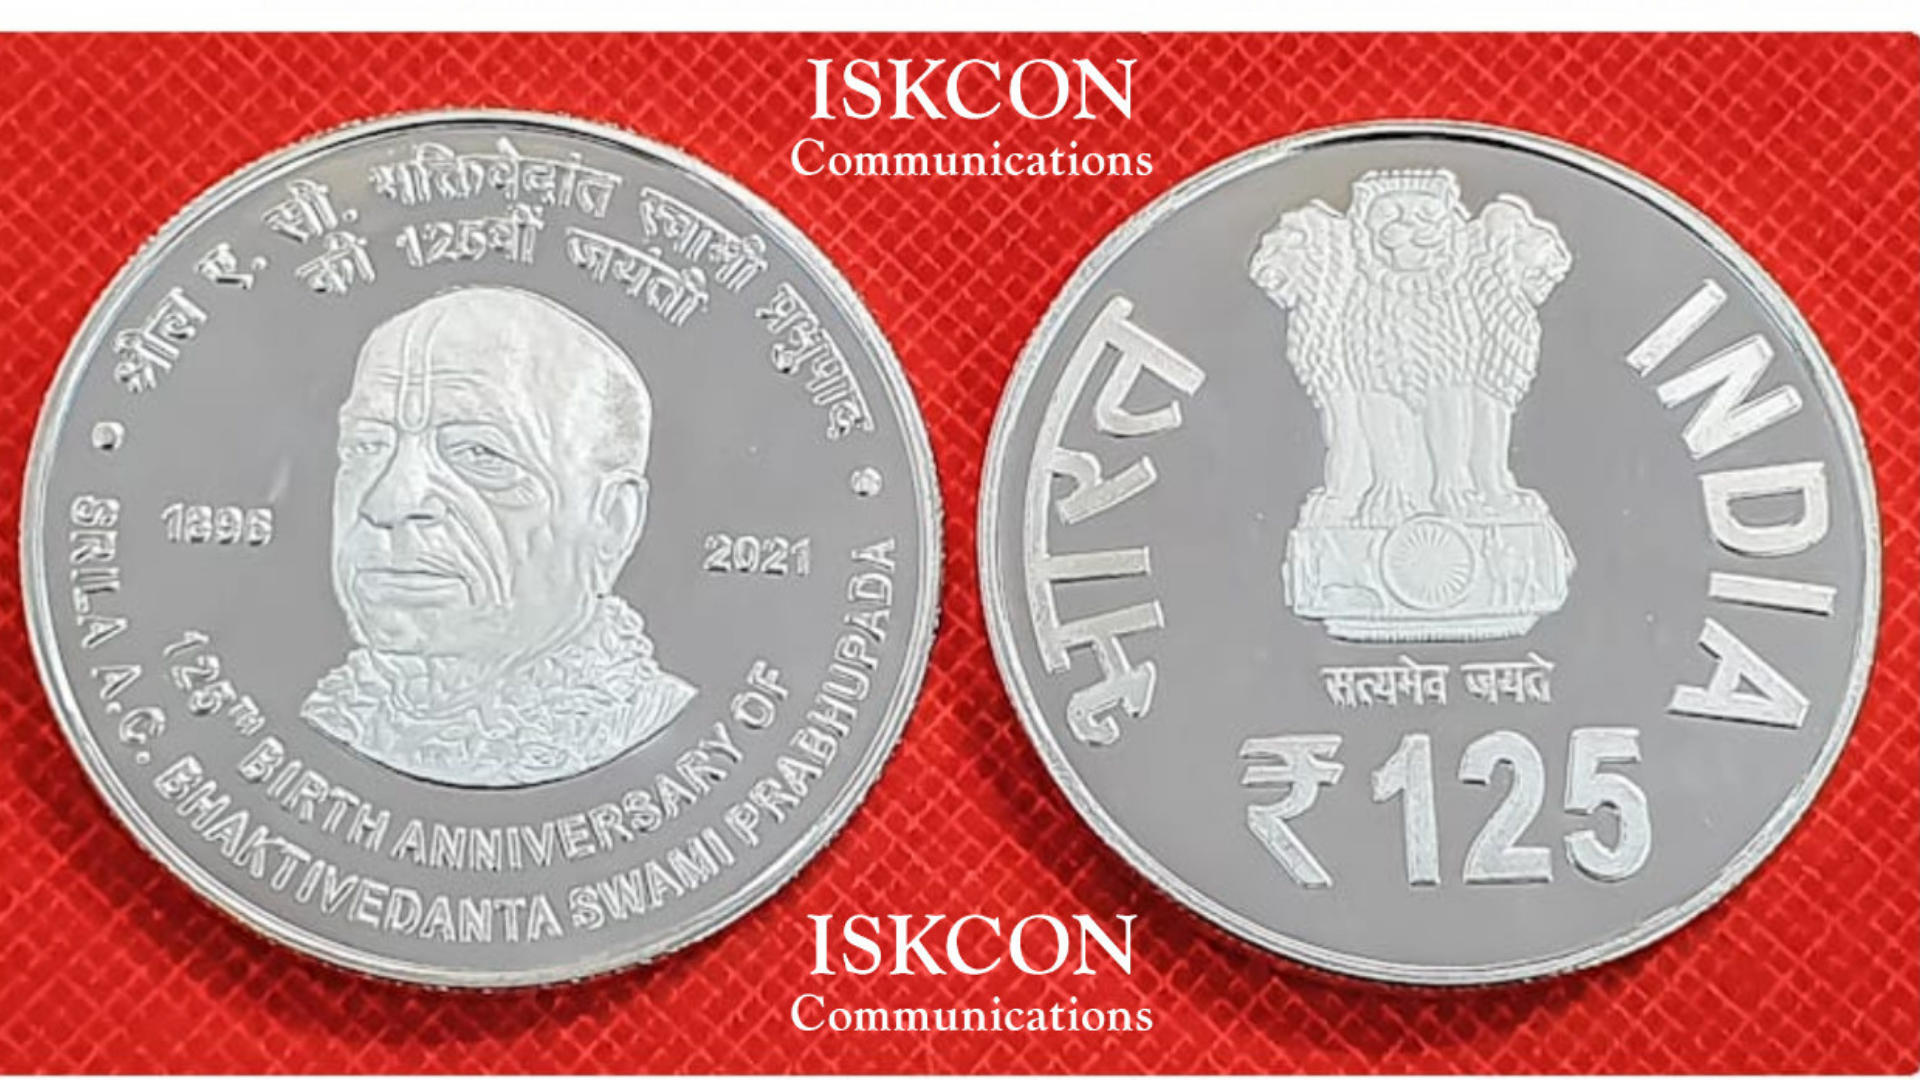 PM Modi unevils special Rs 125 coin on ISKCON founder's 125th birth anniversary_40.1